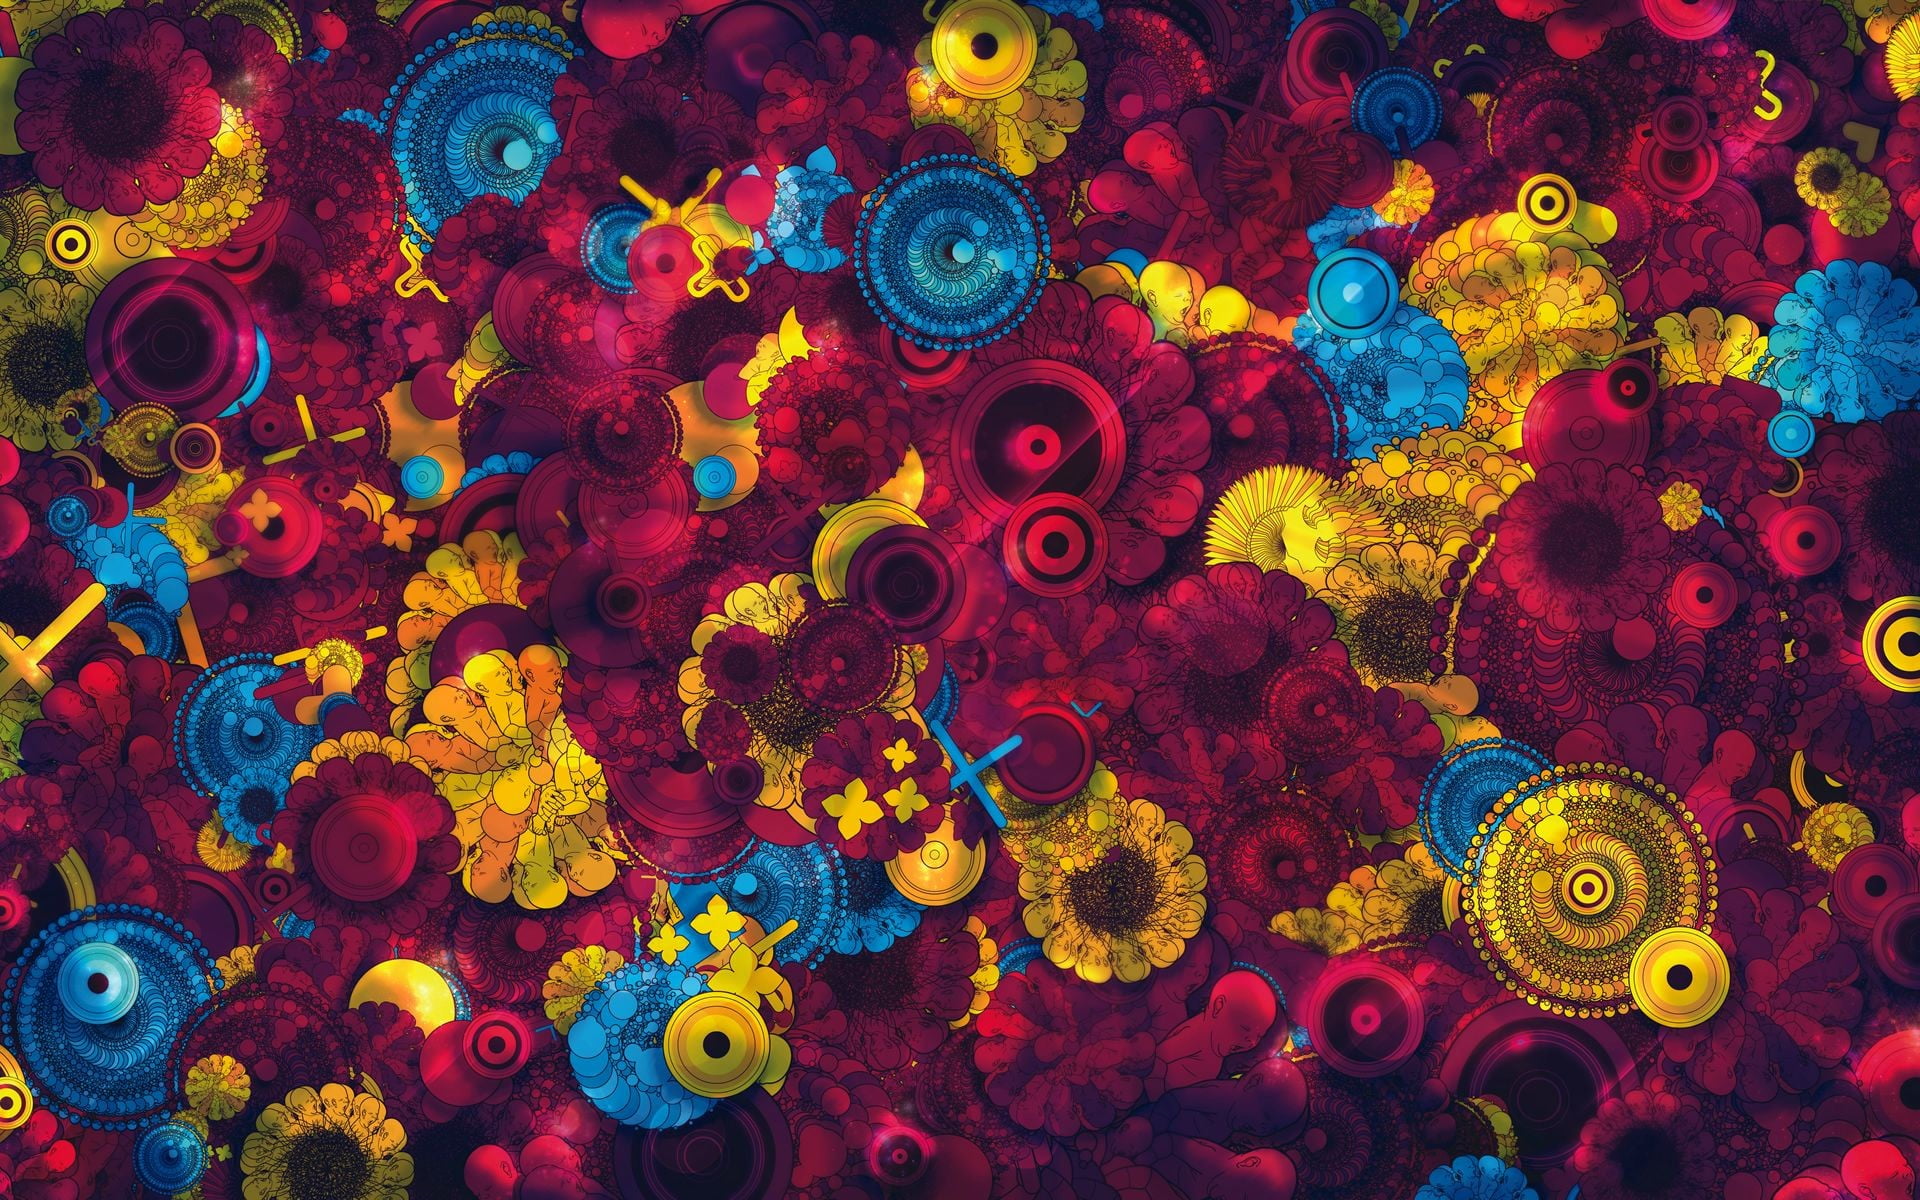 psychedelic, digital art, colorful, flowers, abstract, multi colored